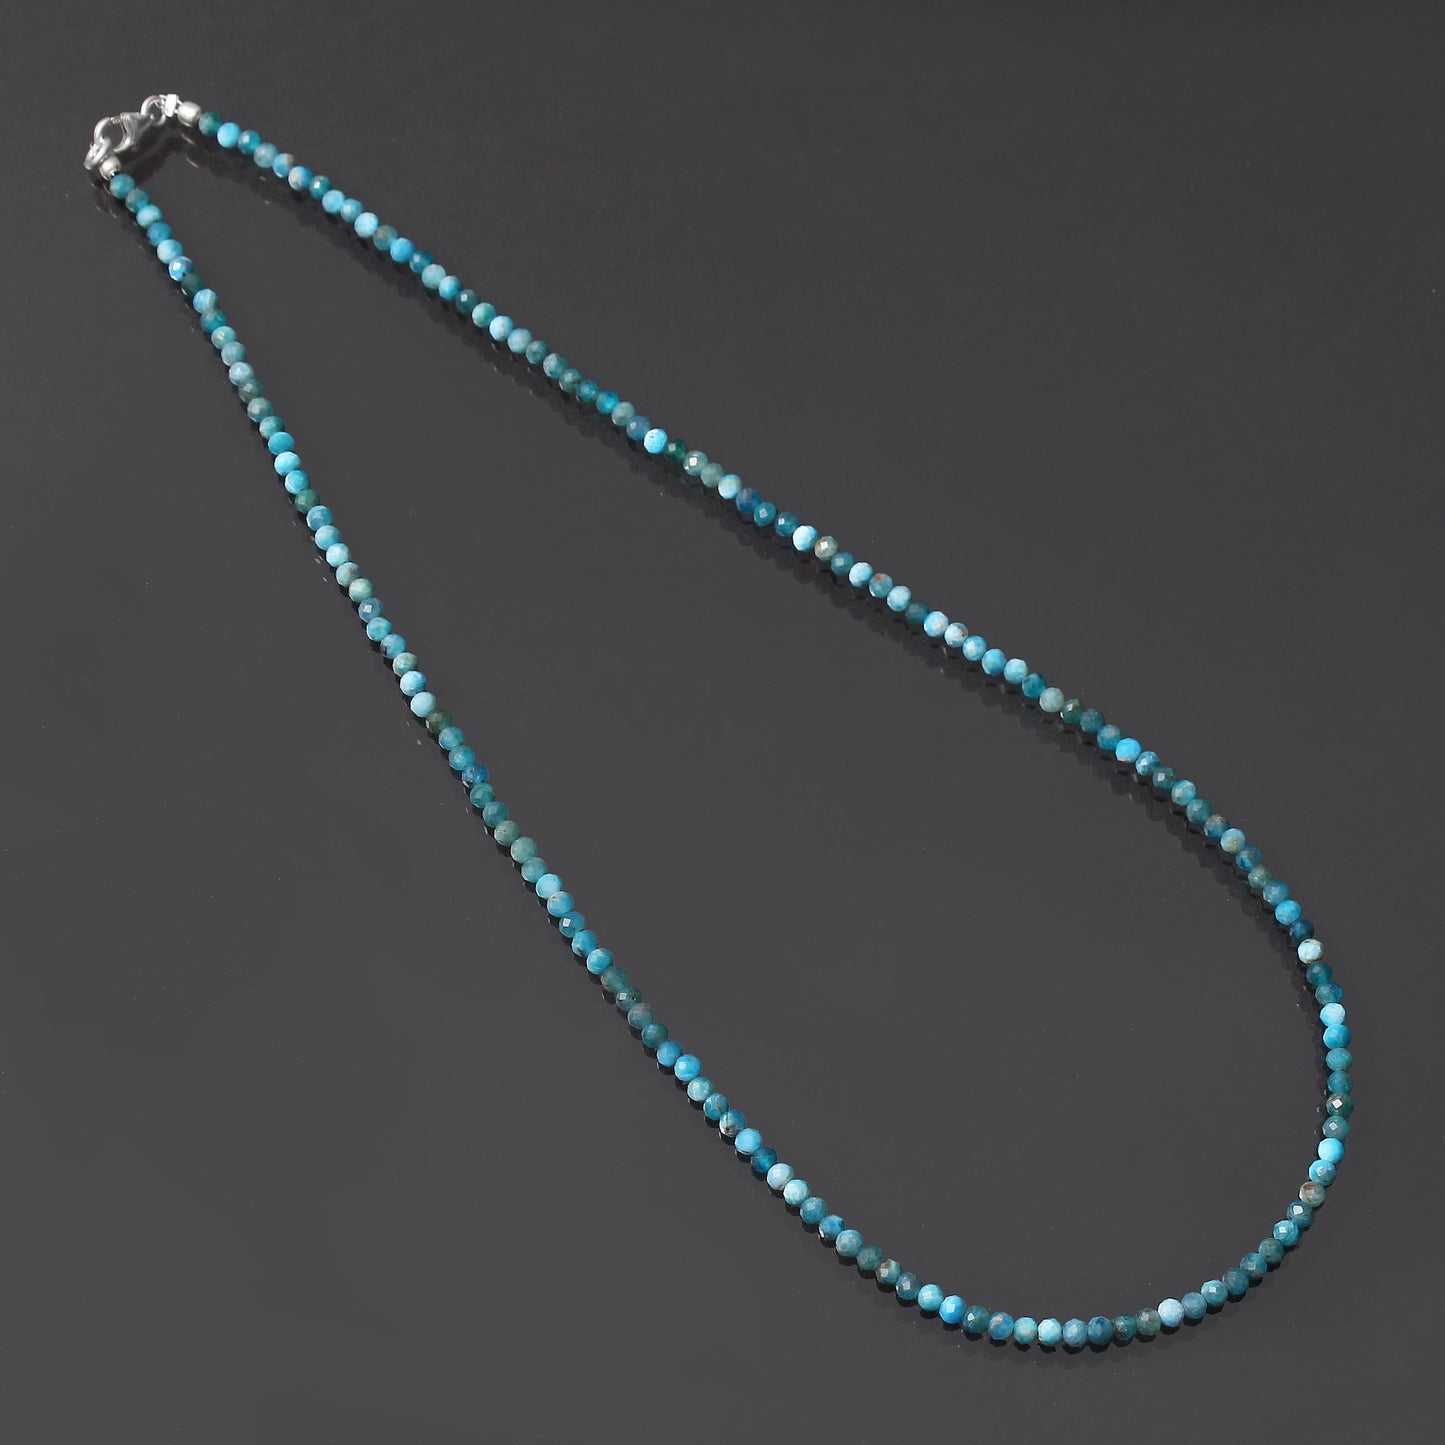 Neon Blue Apatite Beaded Necklace, Faceted Round Apatite Beads Necklace, Apatite Jewelry Necklace, GemsRush